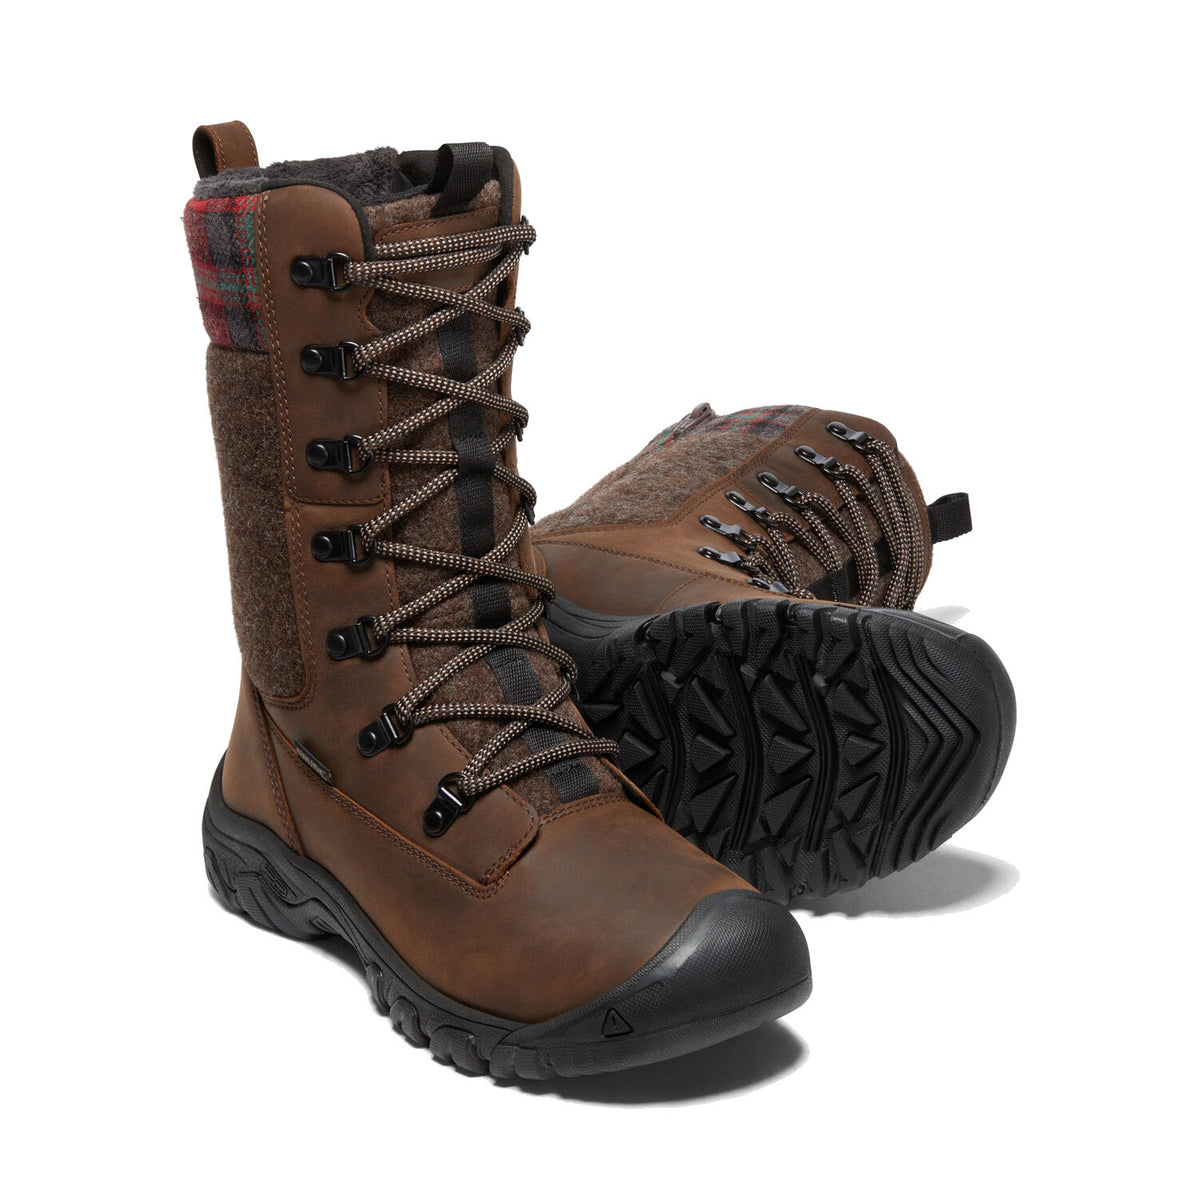 A pair of KEEN GRETA TALL BOOT BROWN - WOMENS with plaid detailing, rugged laces, and thick treaded soles featuring KEEN.DRY membrane, isolated on a white background.